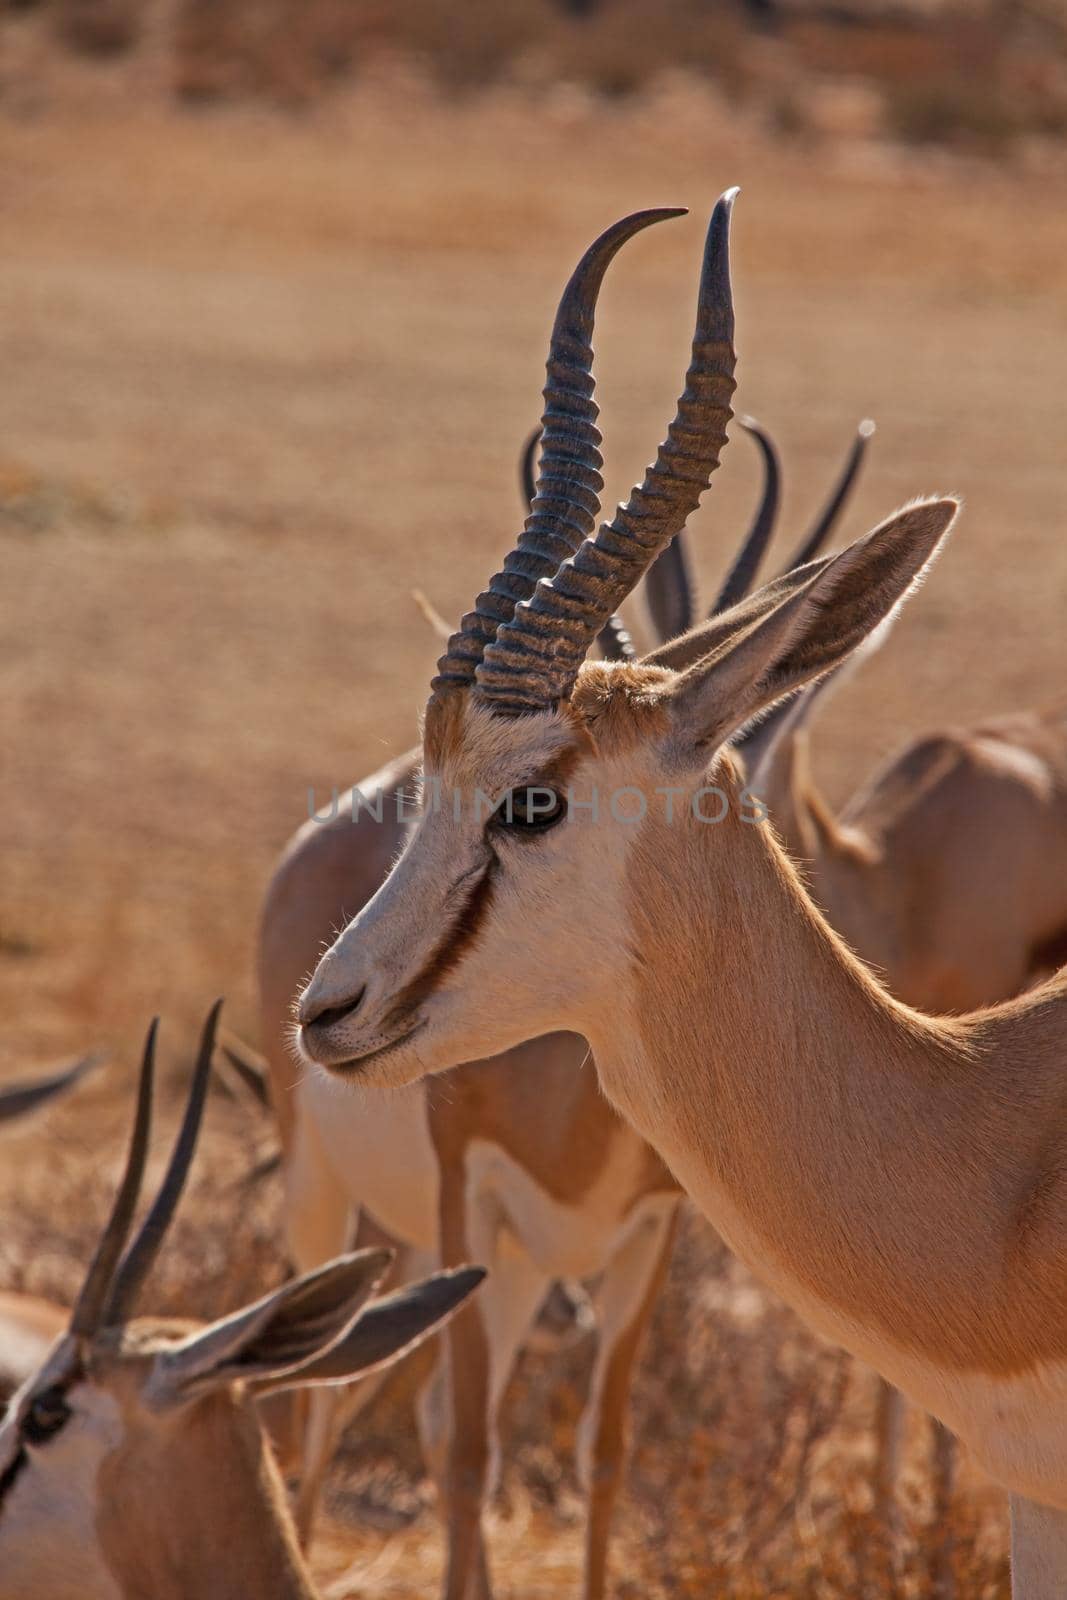 Close-up portrait of a Springbok (Antidorcas marsupialis) in the Kgalagadi Trans Frontier Park. South Africa